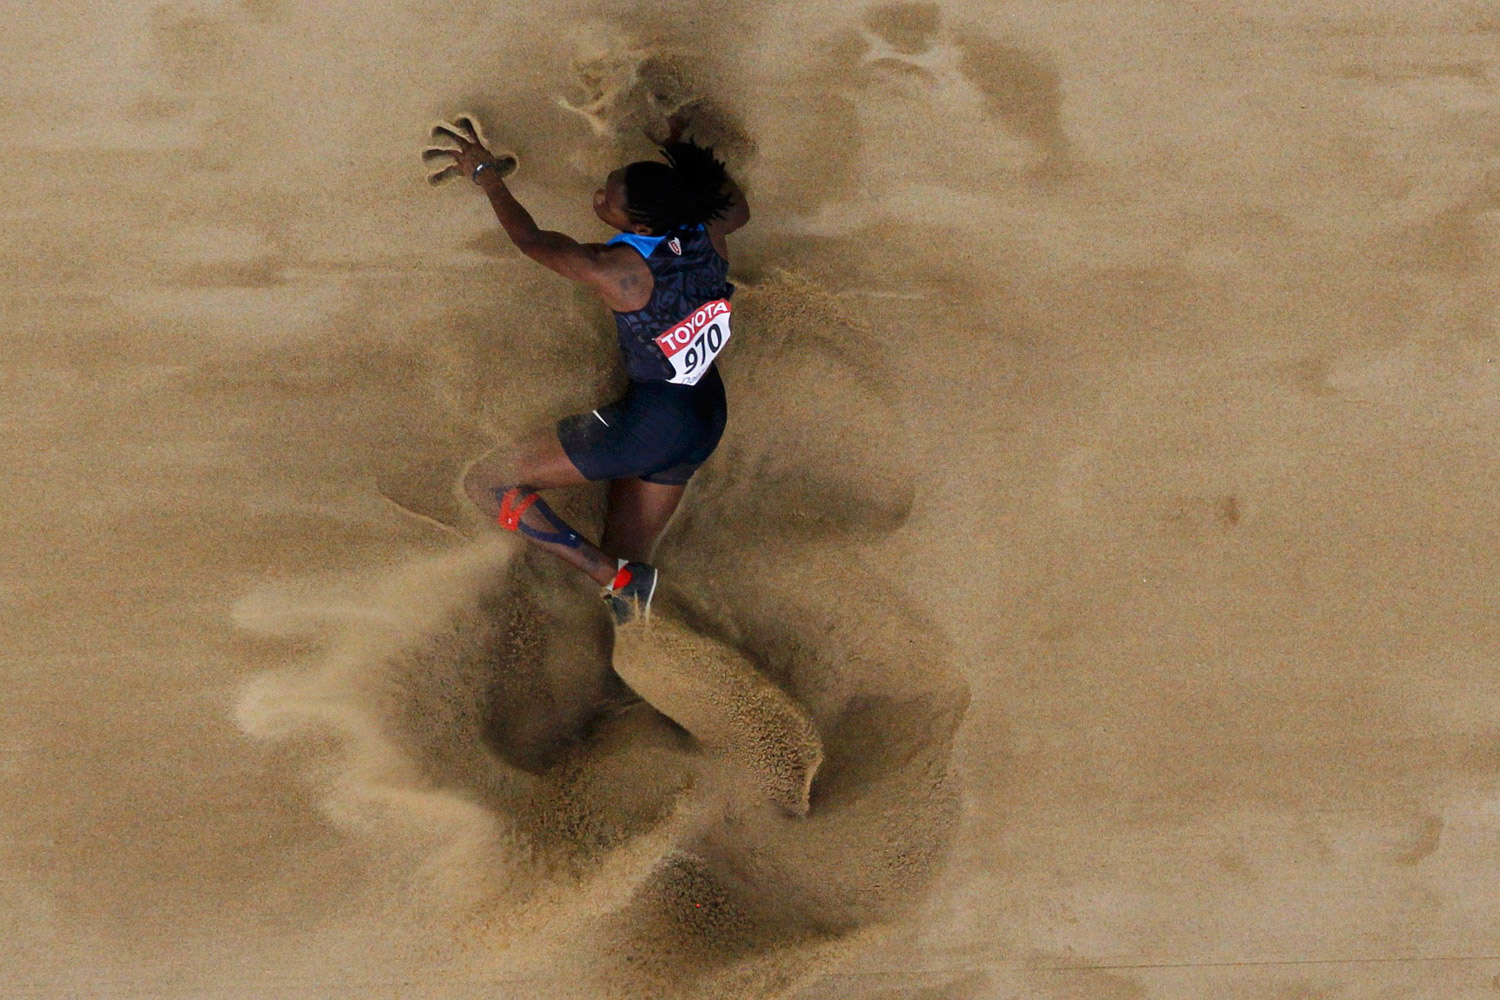 Brittney Reese of the U.S. competes during the women's long jump final at the IAAF World Championships in Daegu, South Korea, August 28, 2011.